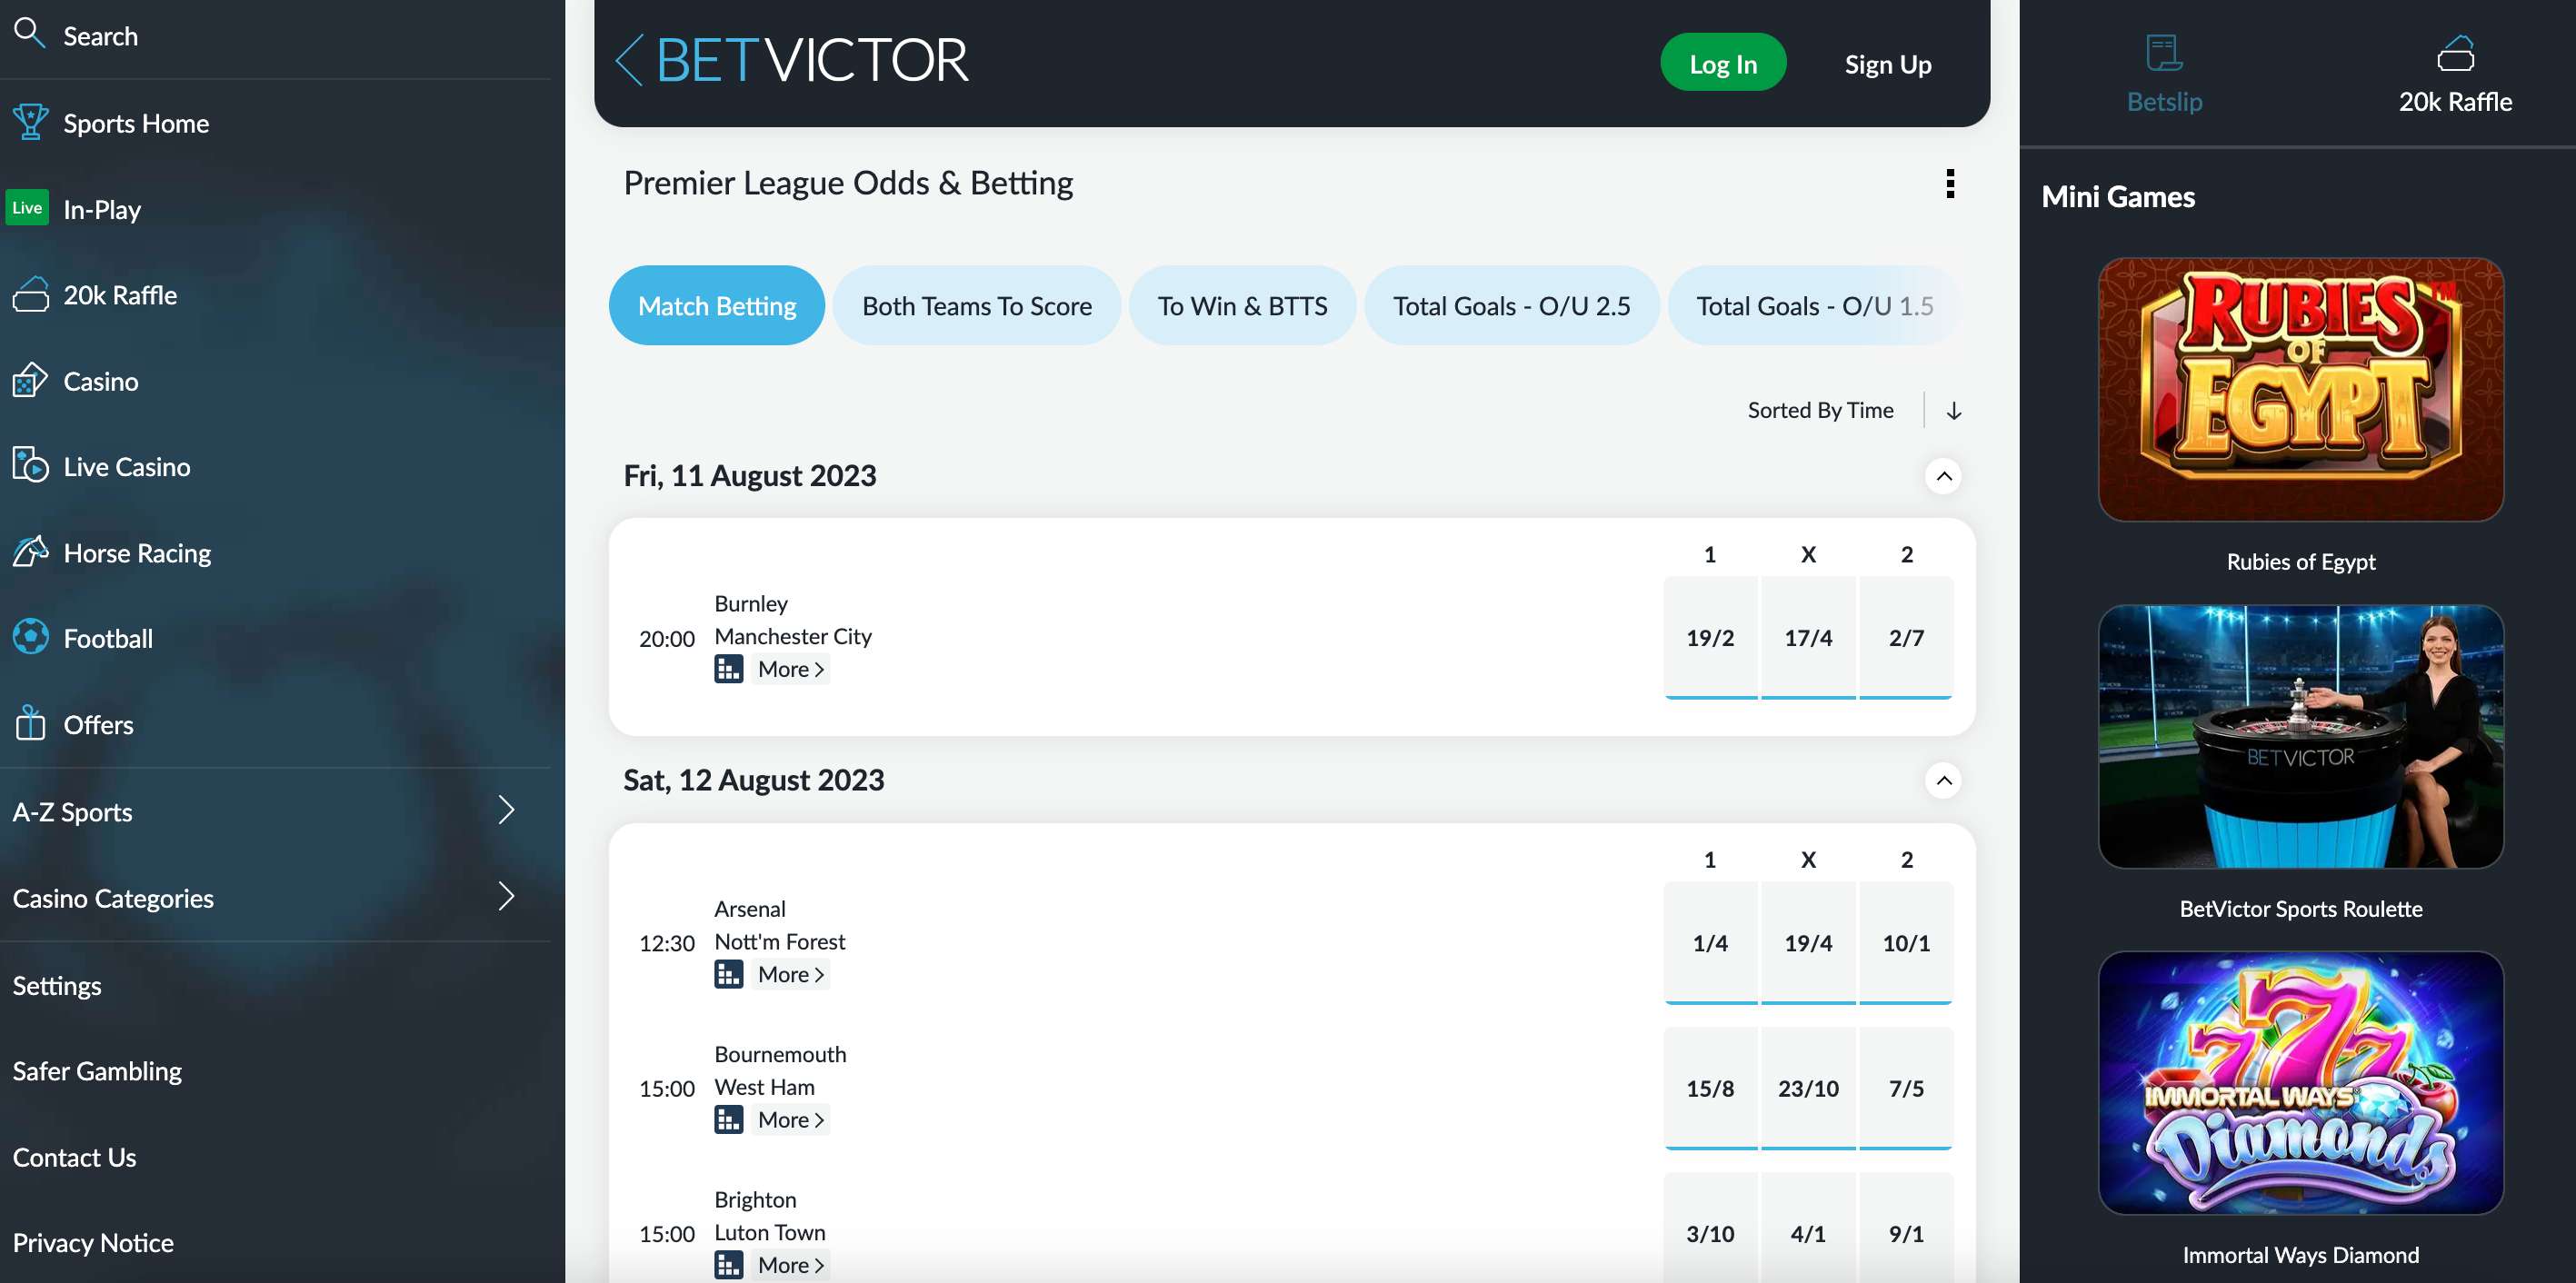 Best Betting Sites - BetVictor